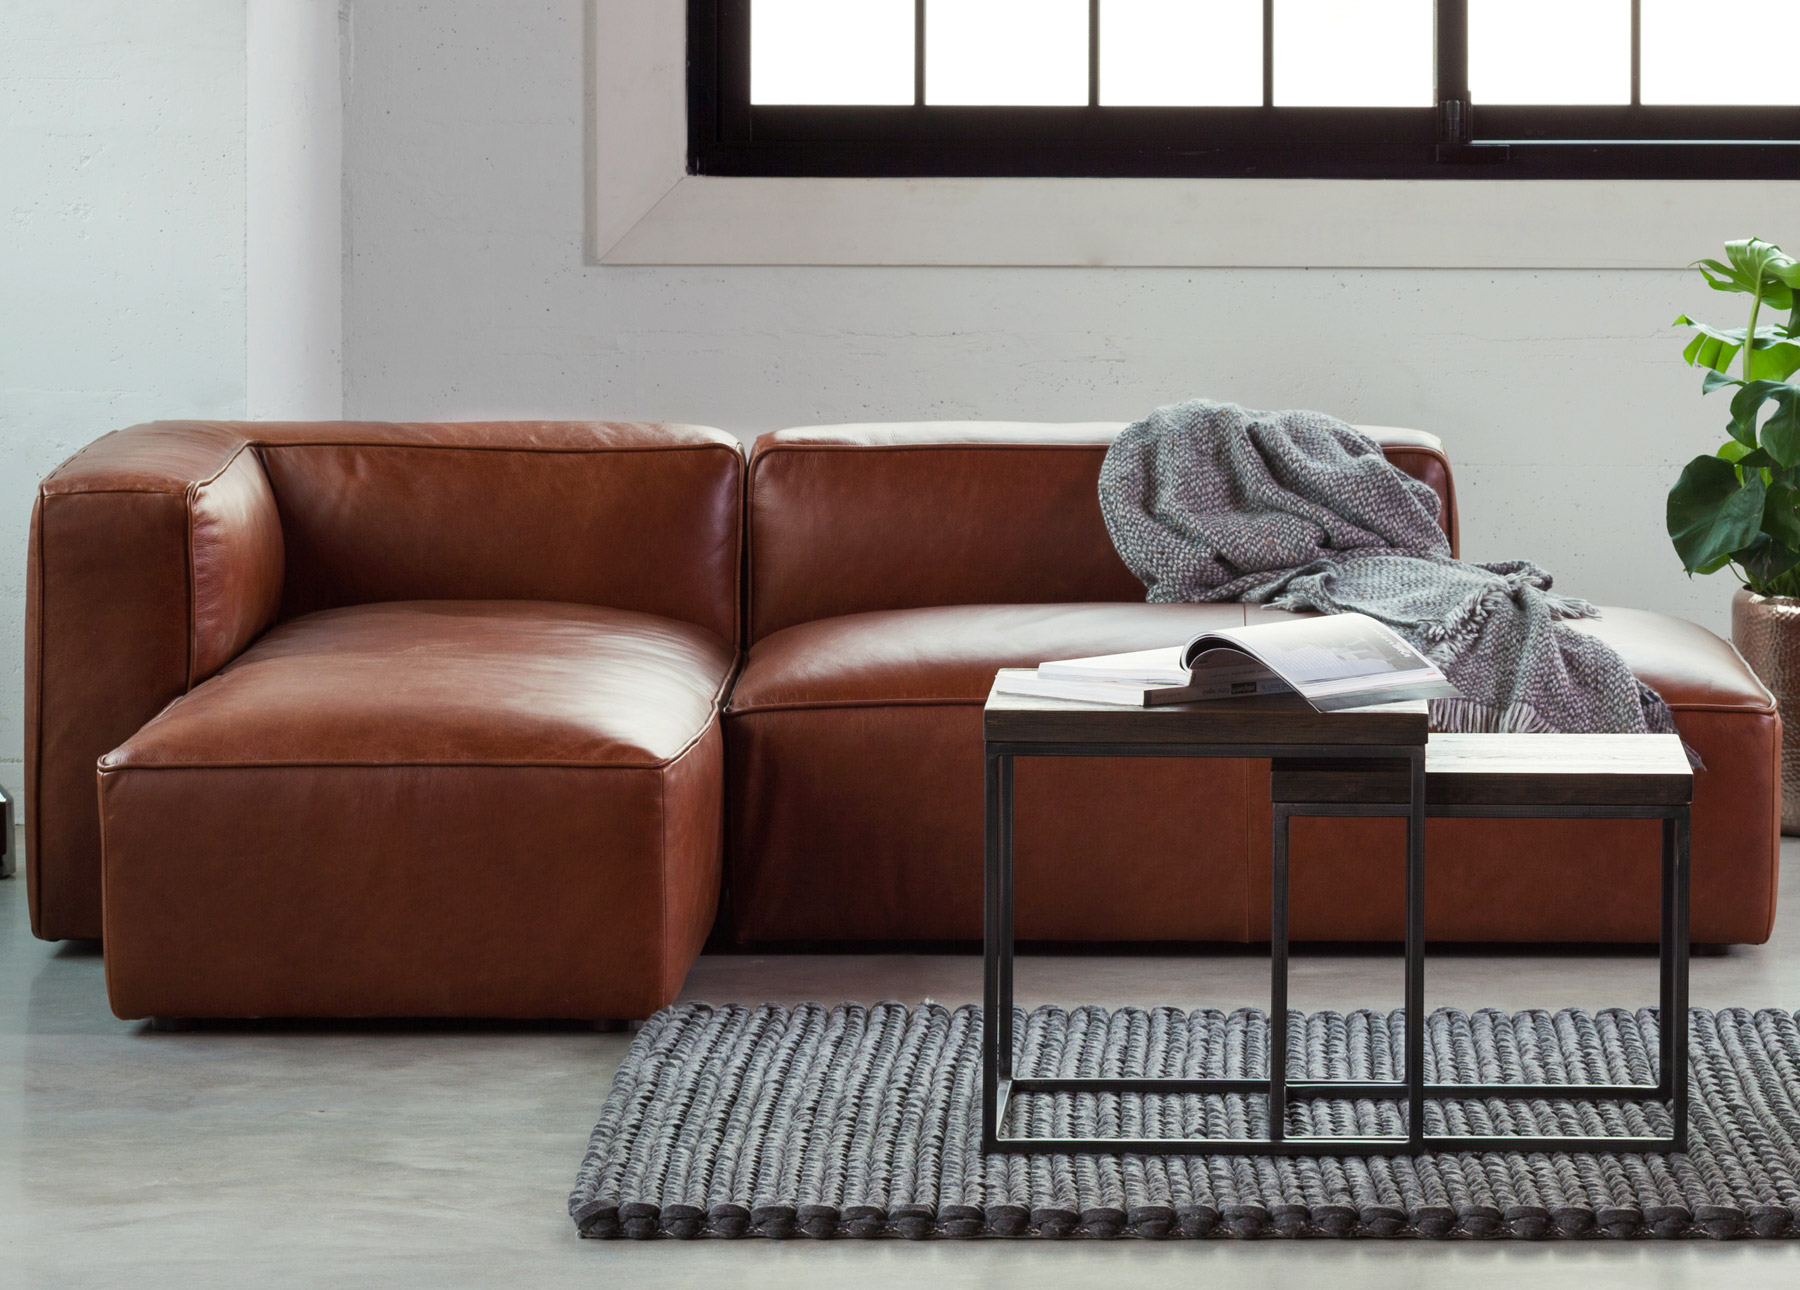 Mello Taos Brown left sectional sofa with coffee tables and rug